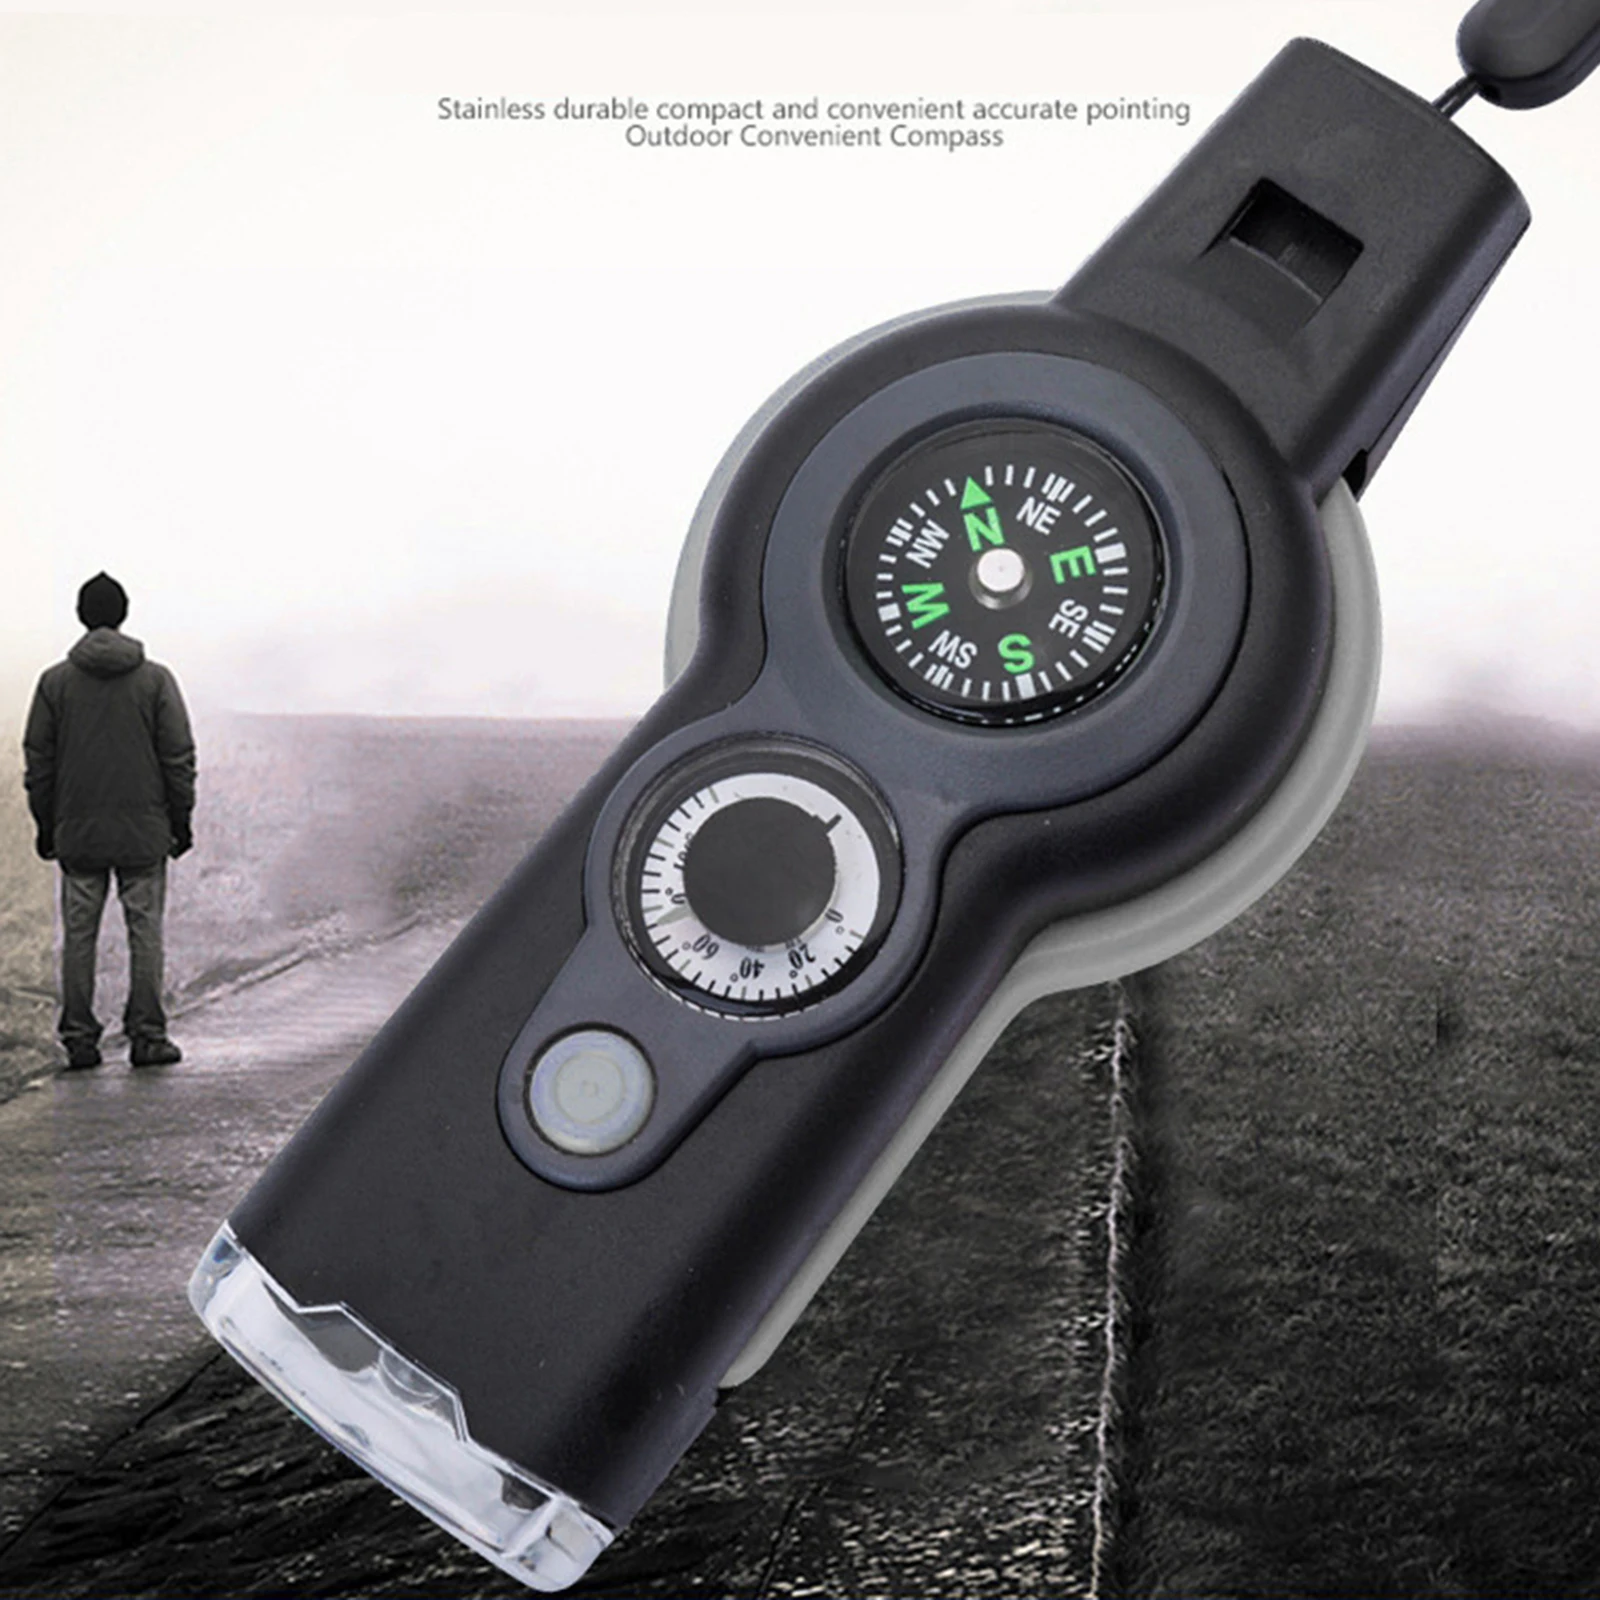 7 in 1 Military Survival Whistle Multi-function Emergency Life Saving Tool Camping Hiking Accessory flashlight Compass